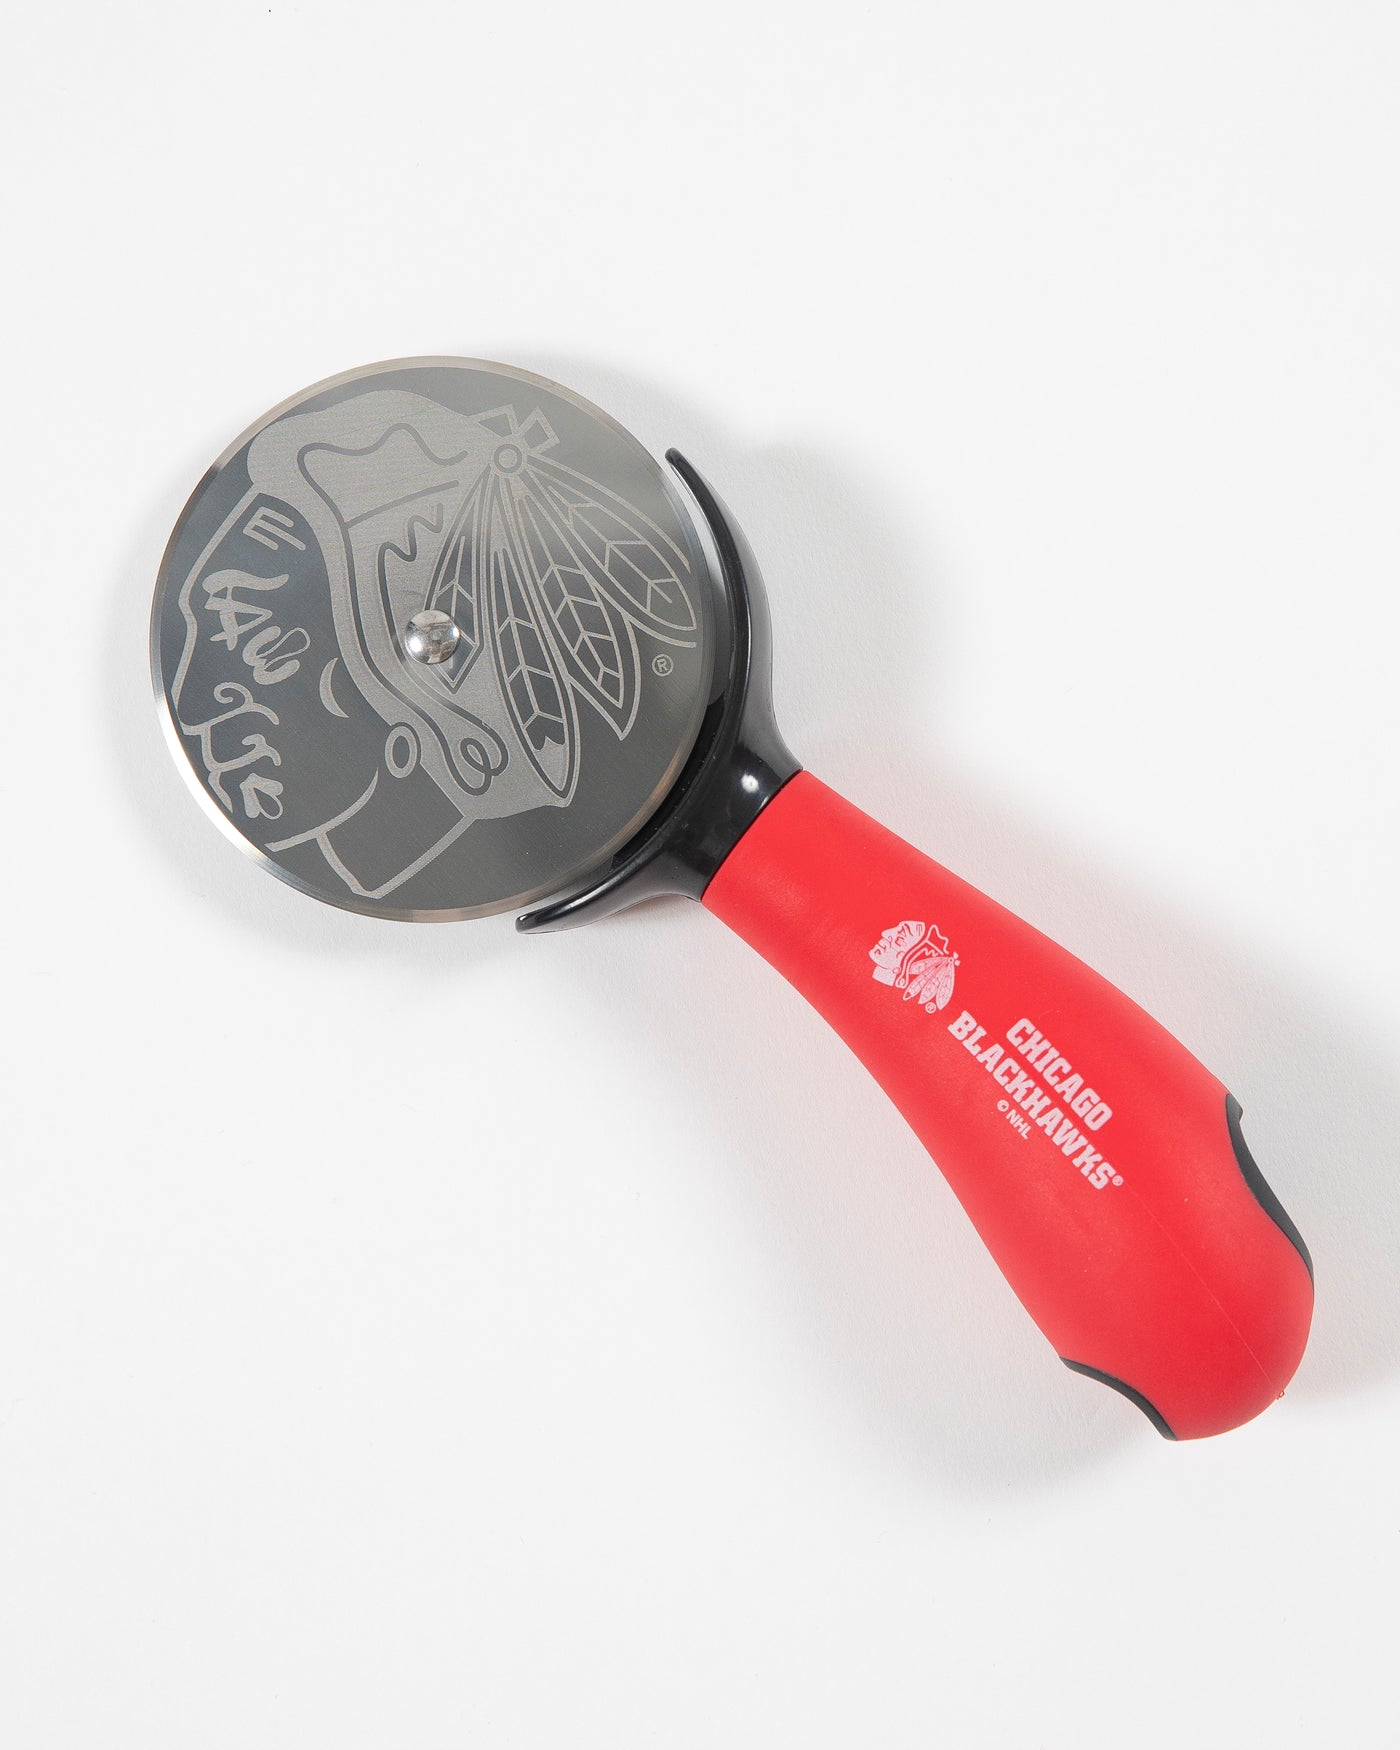 Metal pizza cutter with Chicago Blackhawks branding on blade and handle - front lay flat